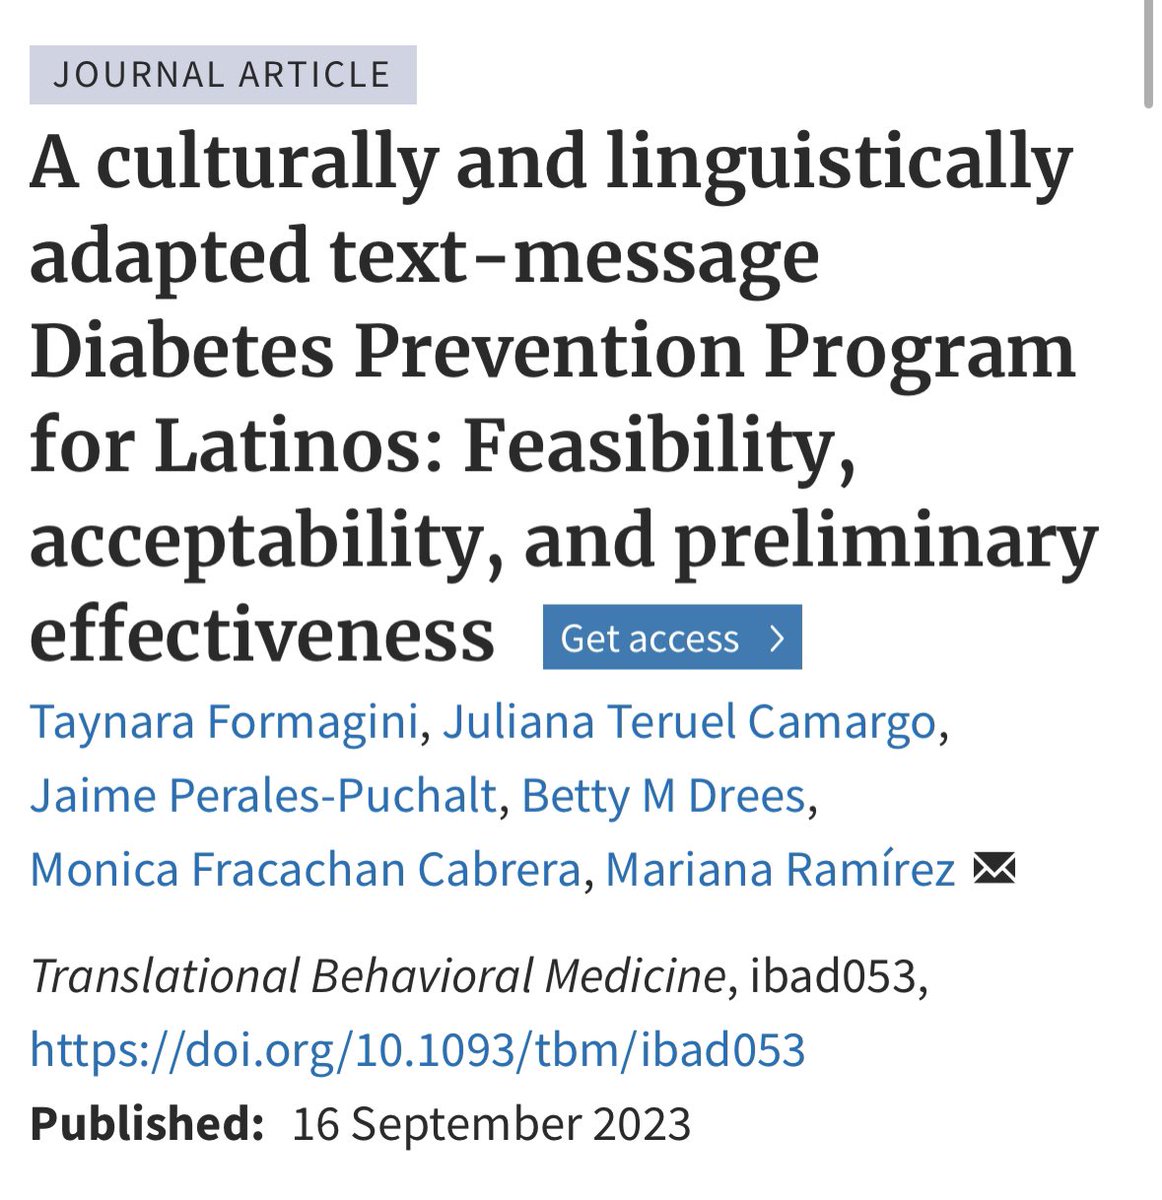 📢 ‼️Fresh from the oven! This manuscript  is the result of an amazing collaboration with outstanding colleagues-friends 🤝🏼

📚Read it here: surl.li/lhzrk
#TeamWork #Research #DPP #LatinoHealth